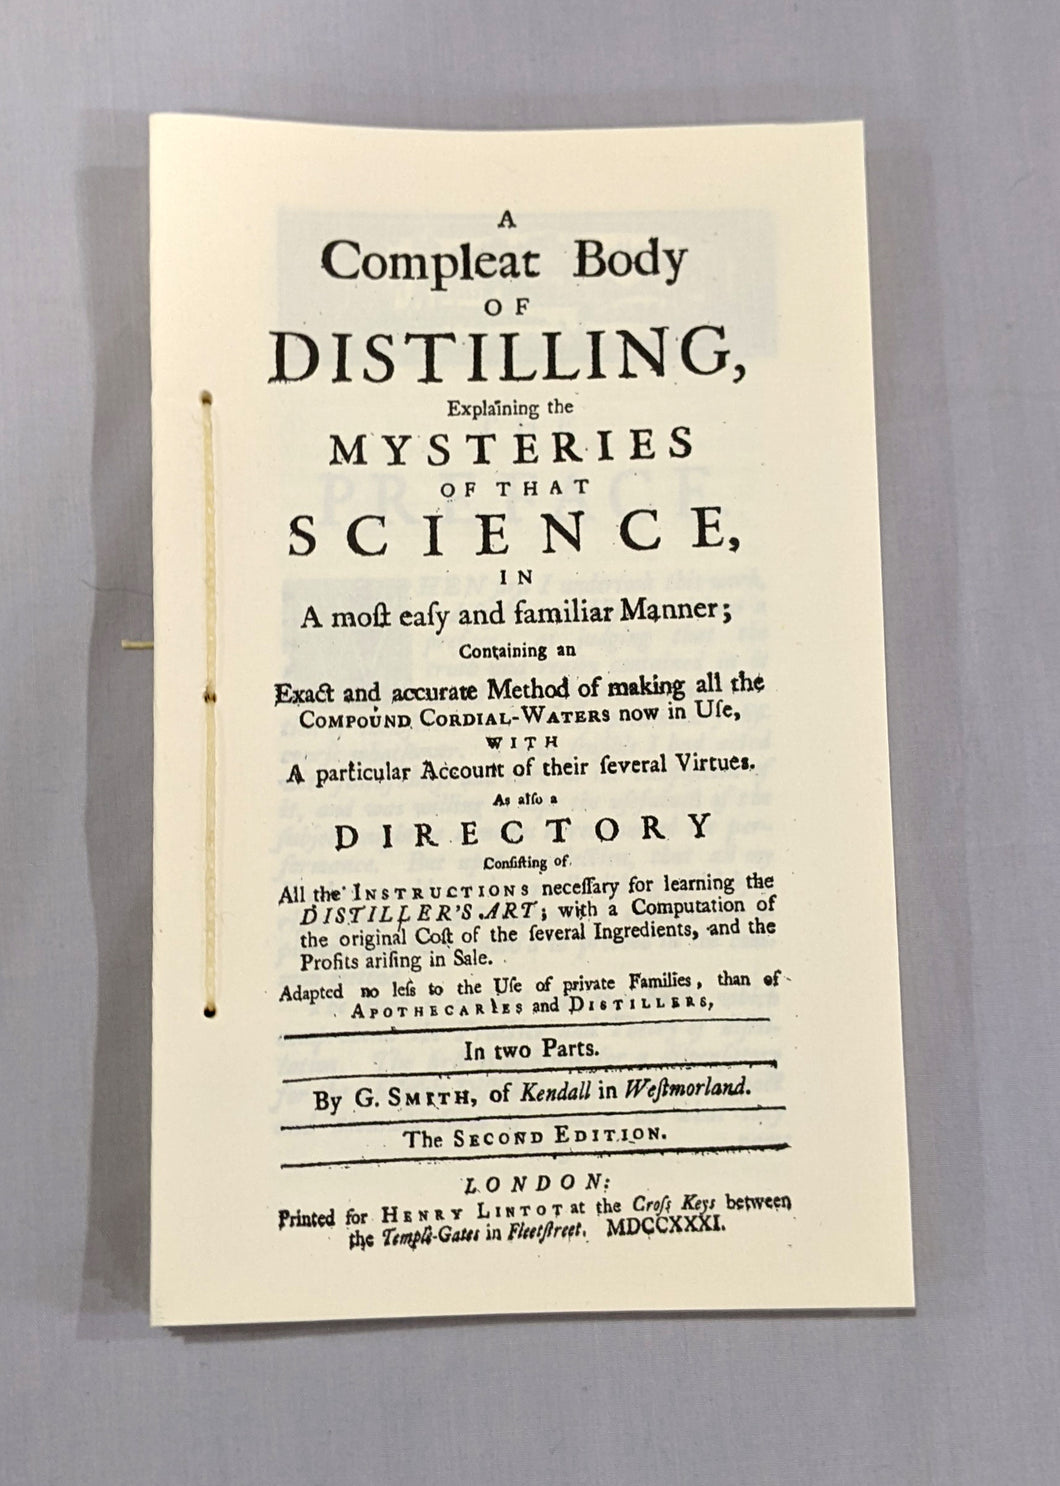 A Compleat Body of Distilling